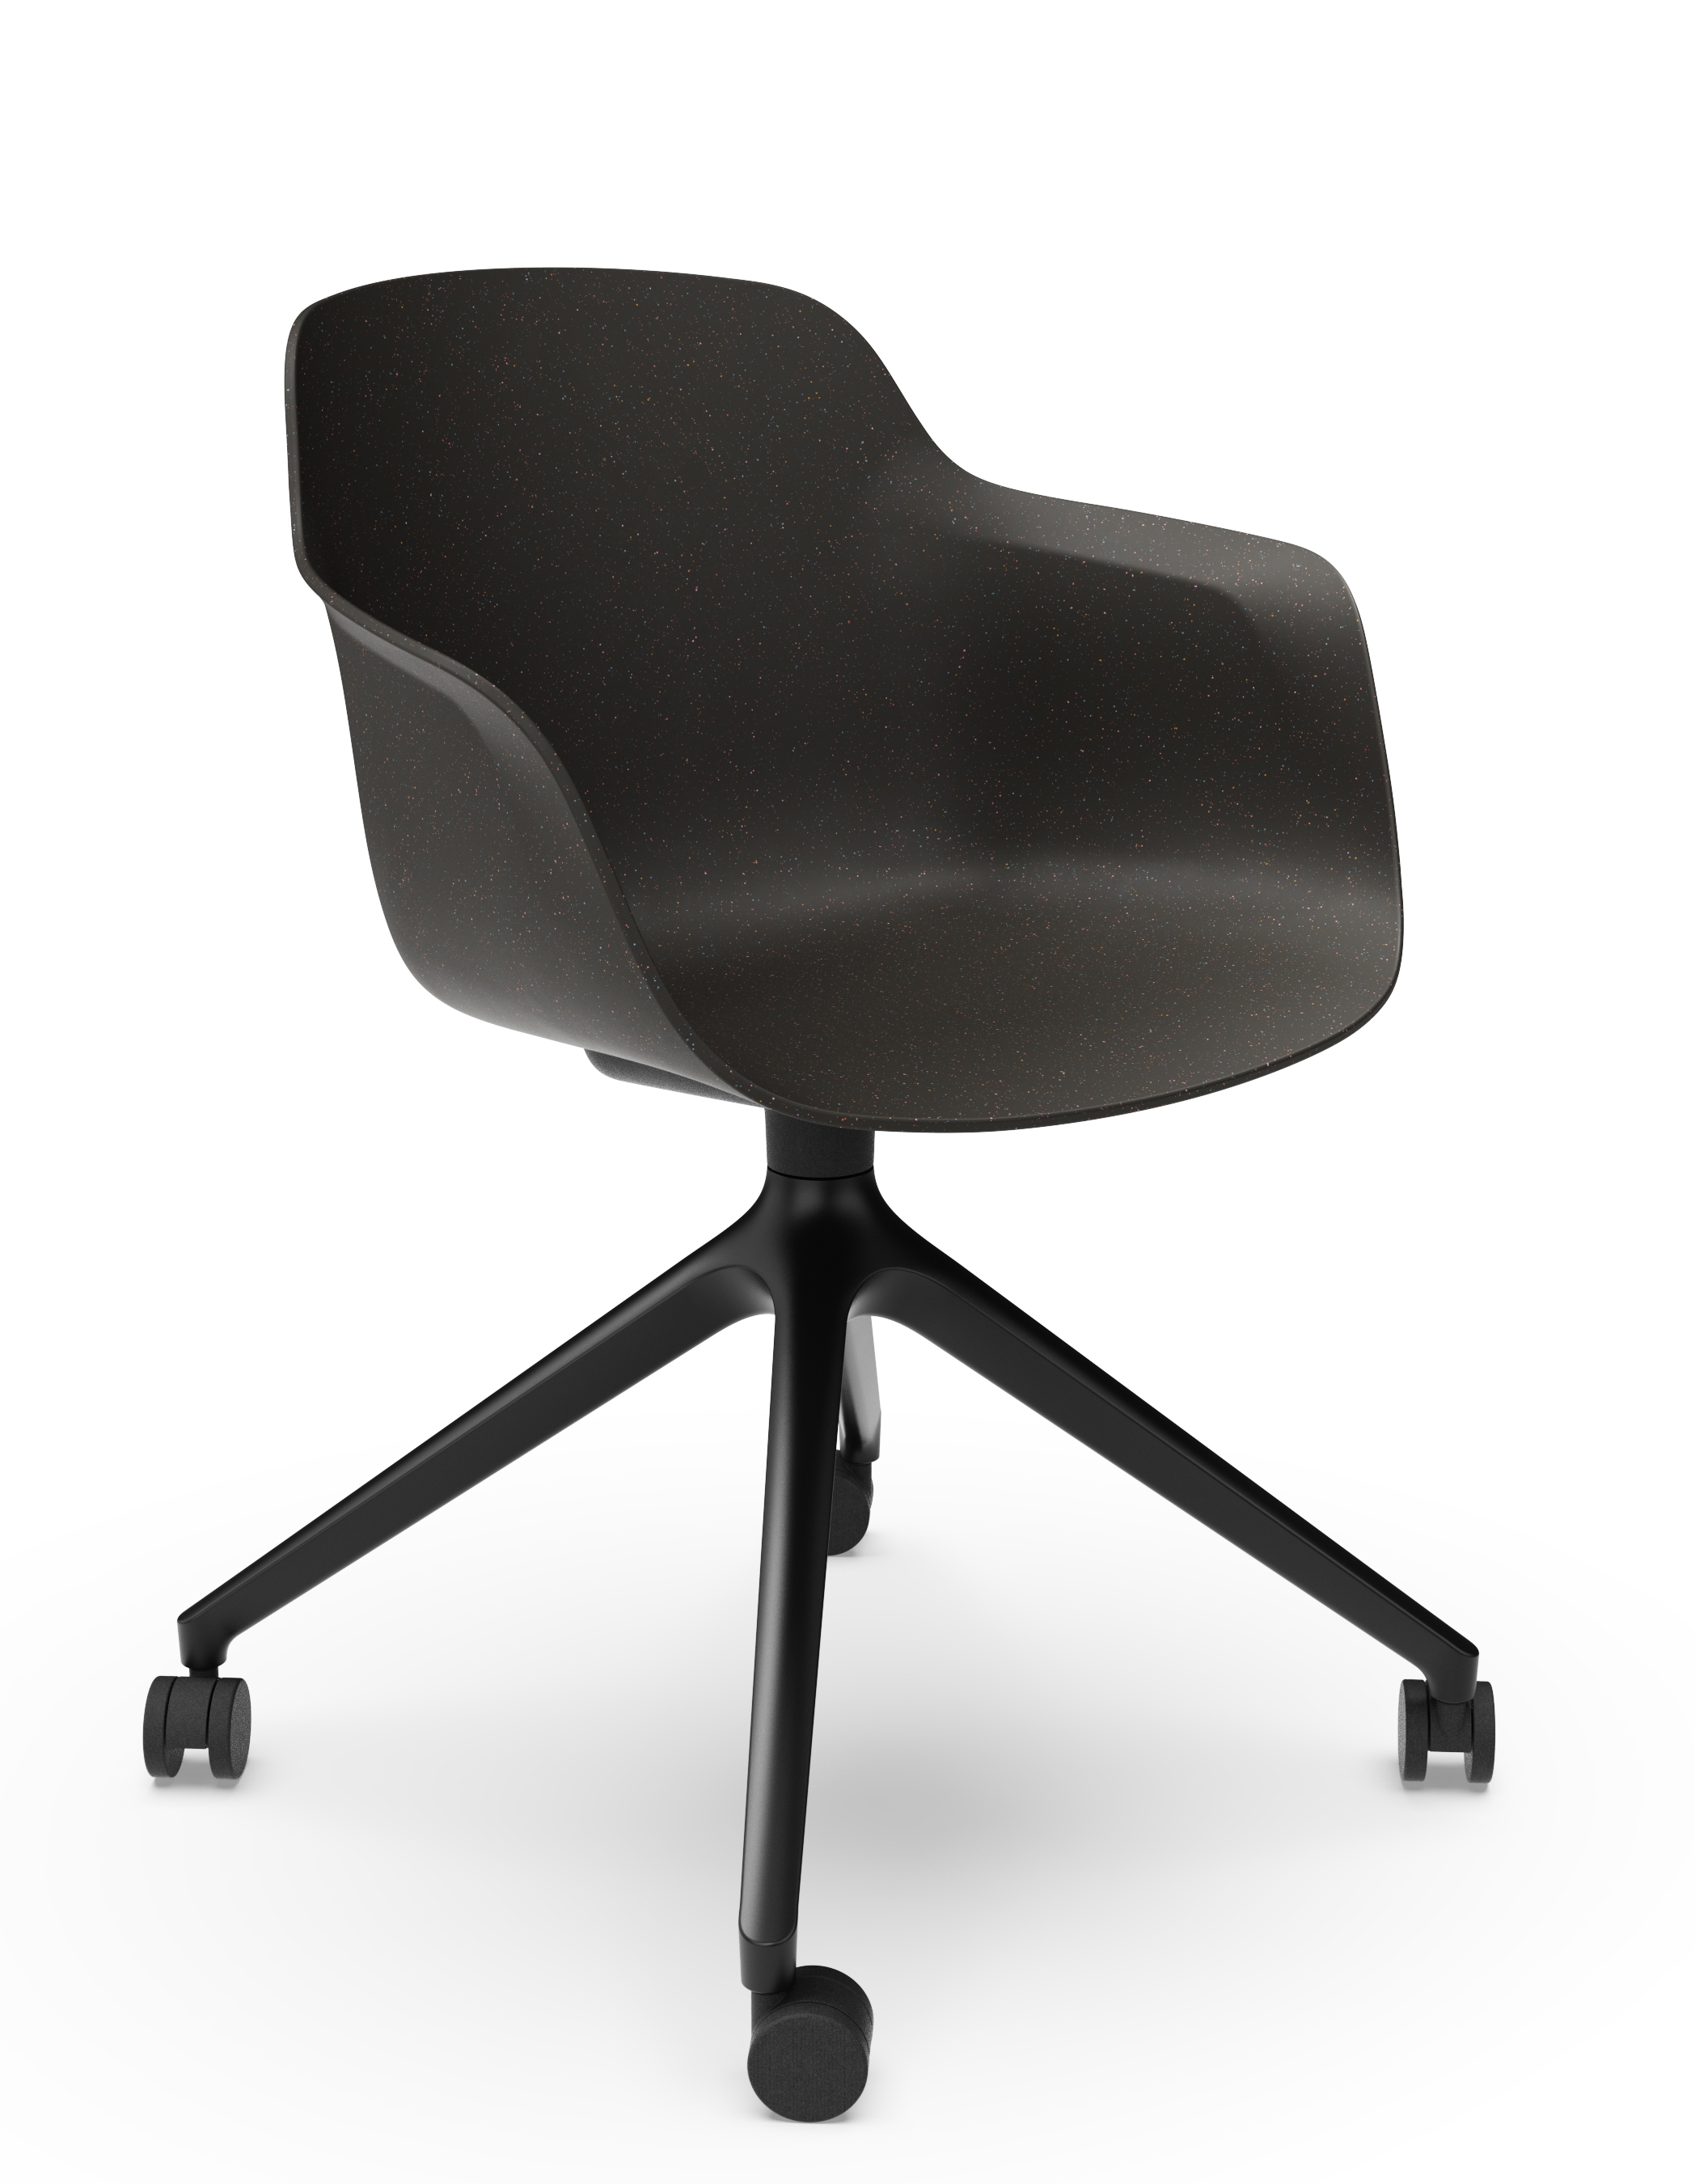 WS - Moto Tub Chair - 4 Star Base with Castors - Black - Front Angle